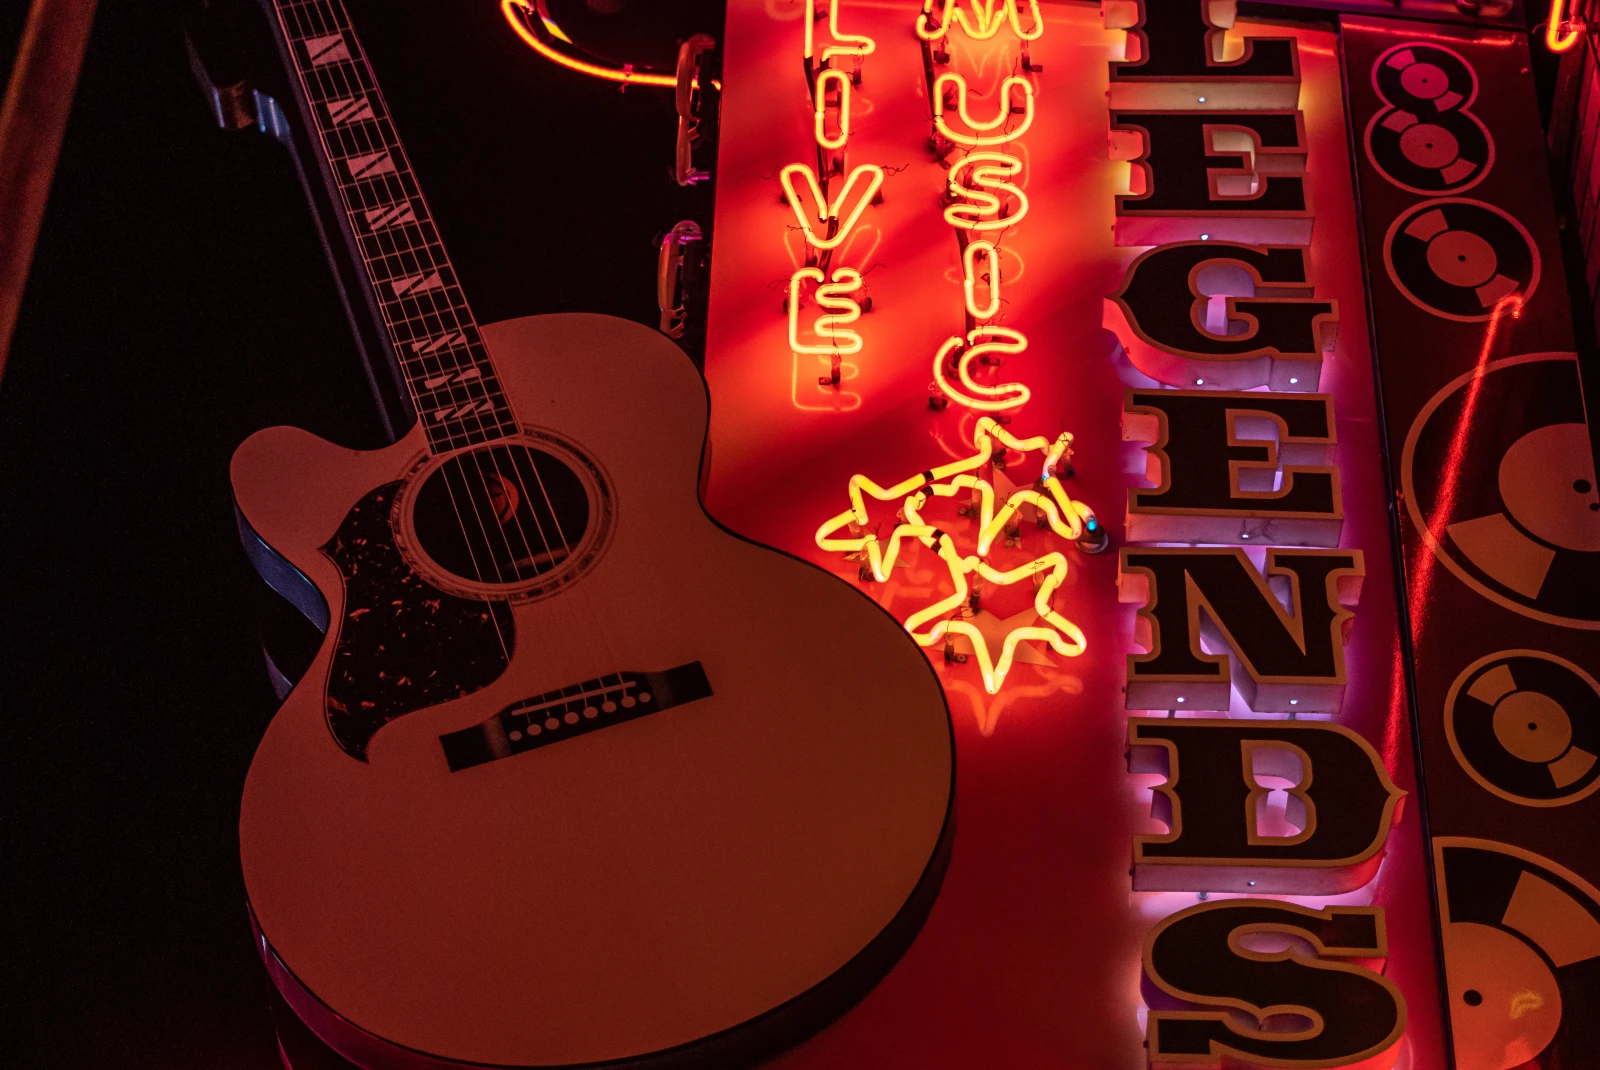 Neon sign with a guitar at night